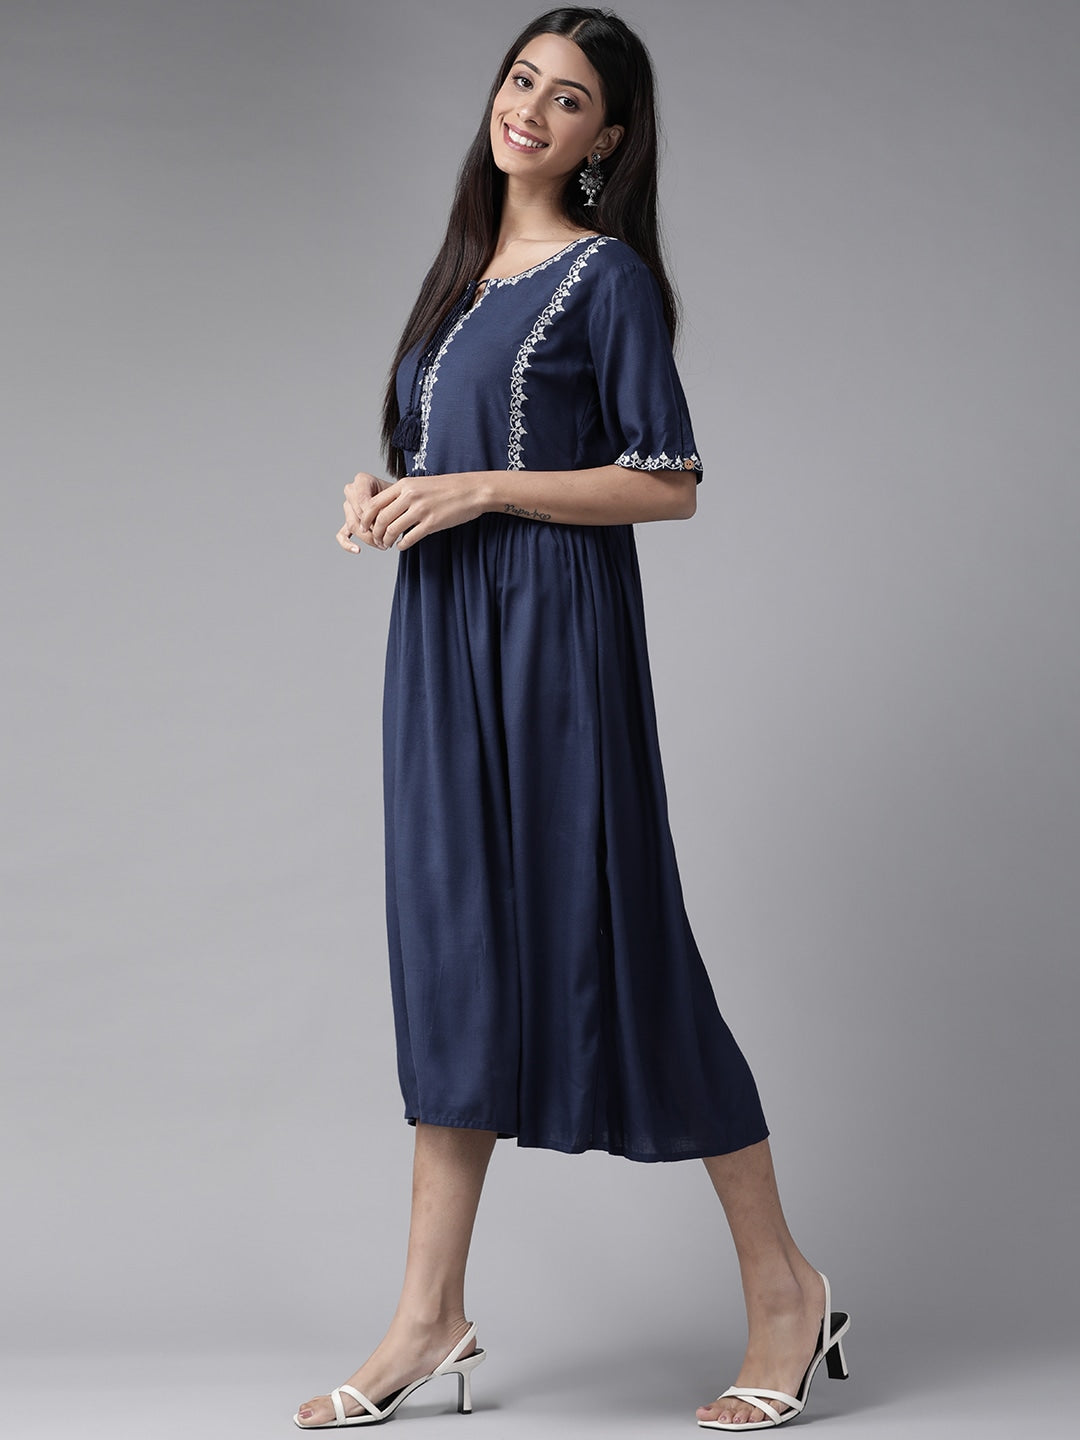 Navy Blue Solid Embroidered Dress-Yufta Store-9243DRSNBS